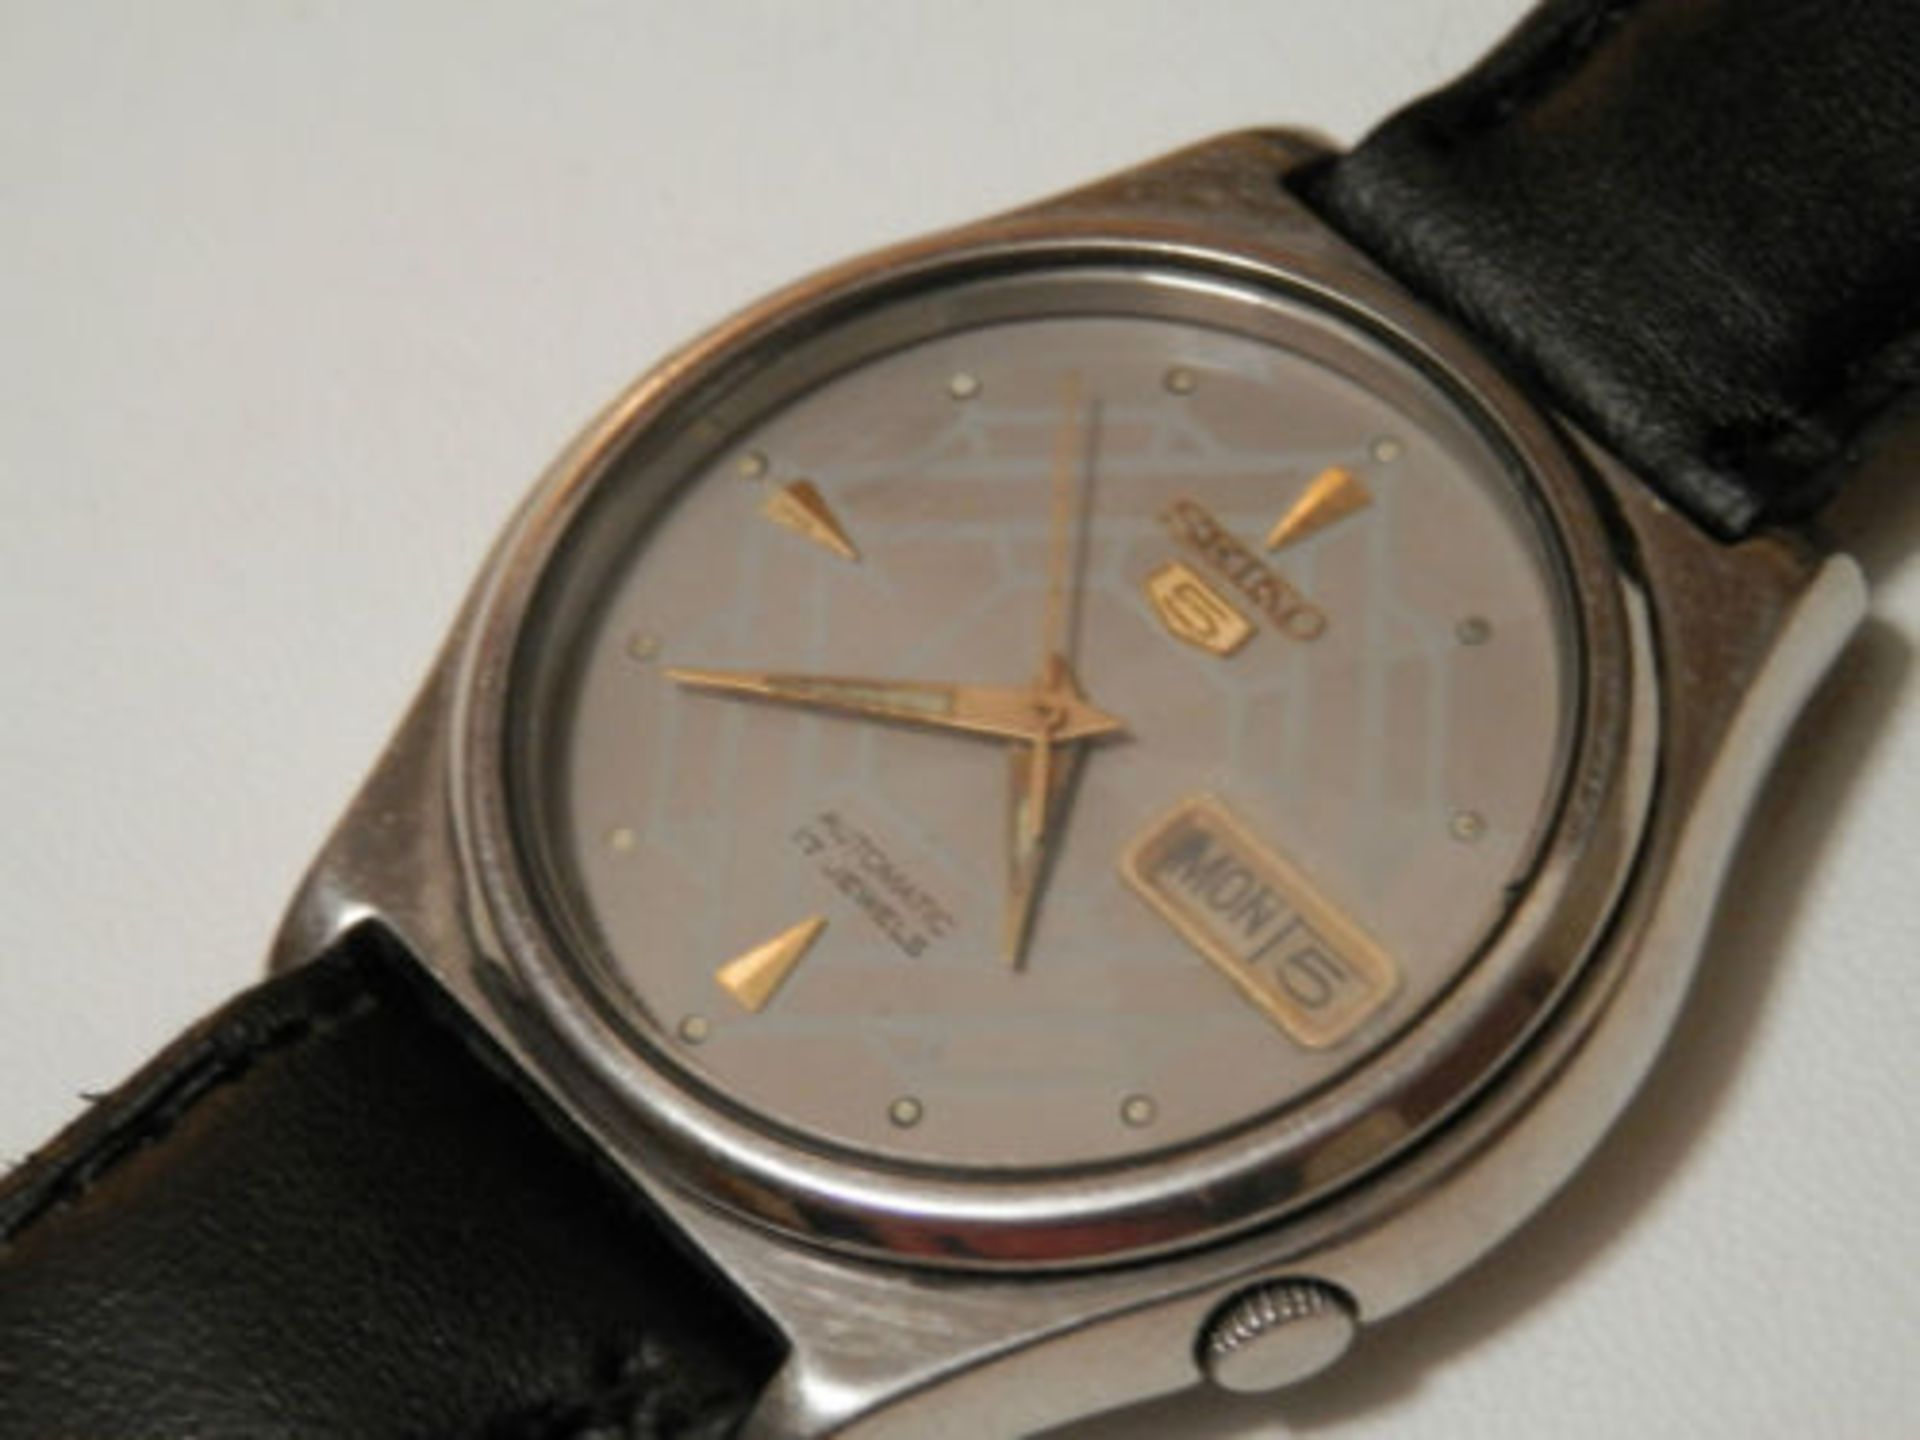 1984 WORKING SEIKO 7009 AUTOMATIC 17 JEWEL DAY/DATE WATCH, STAINLESS CASE. - Image 14 of 18